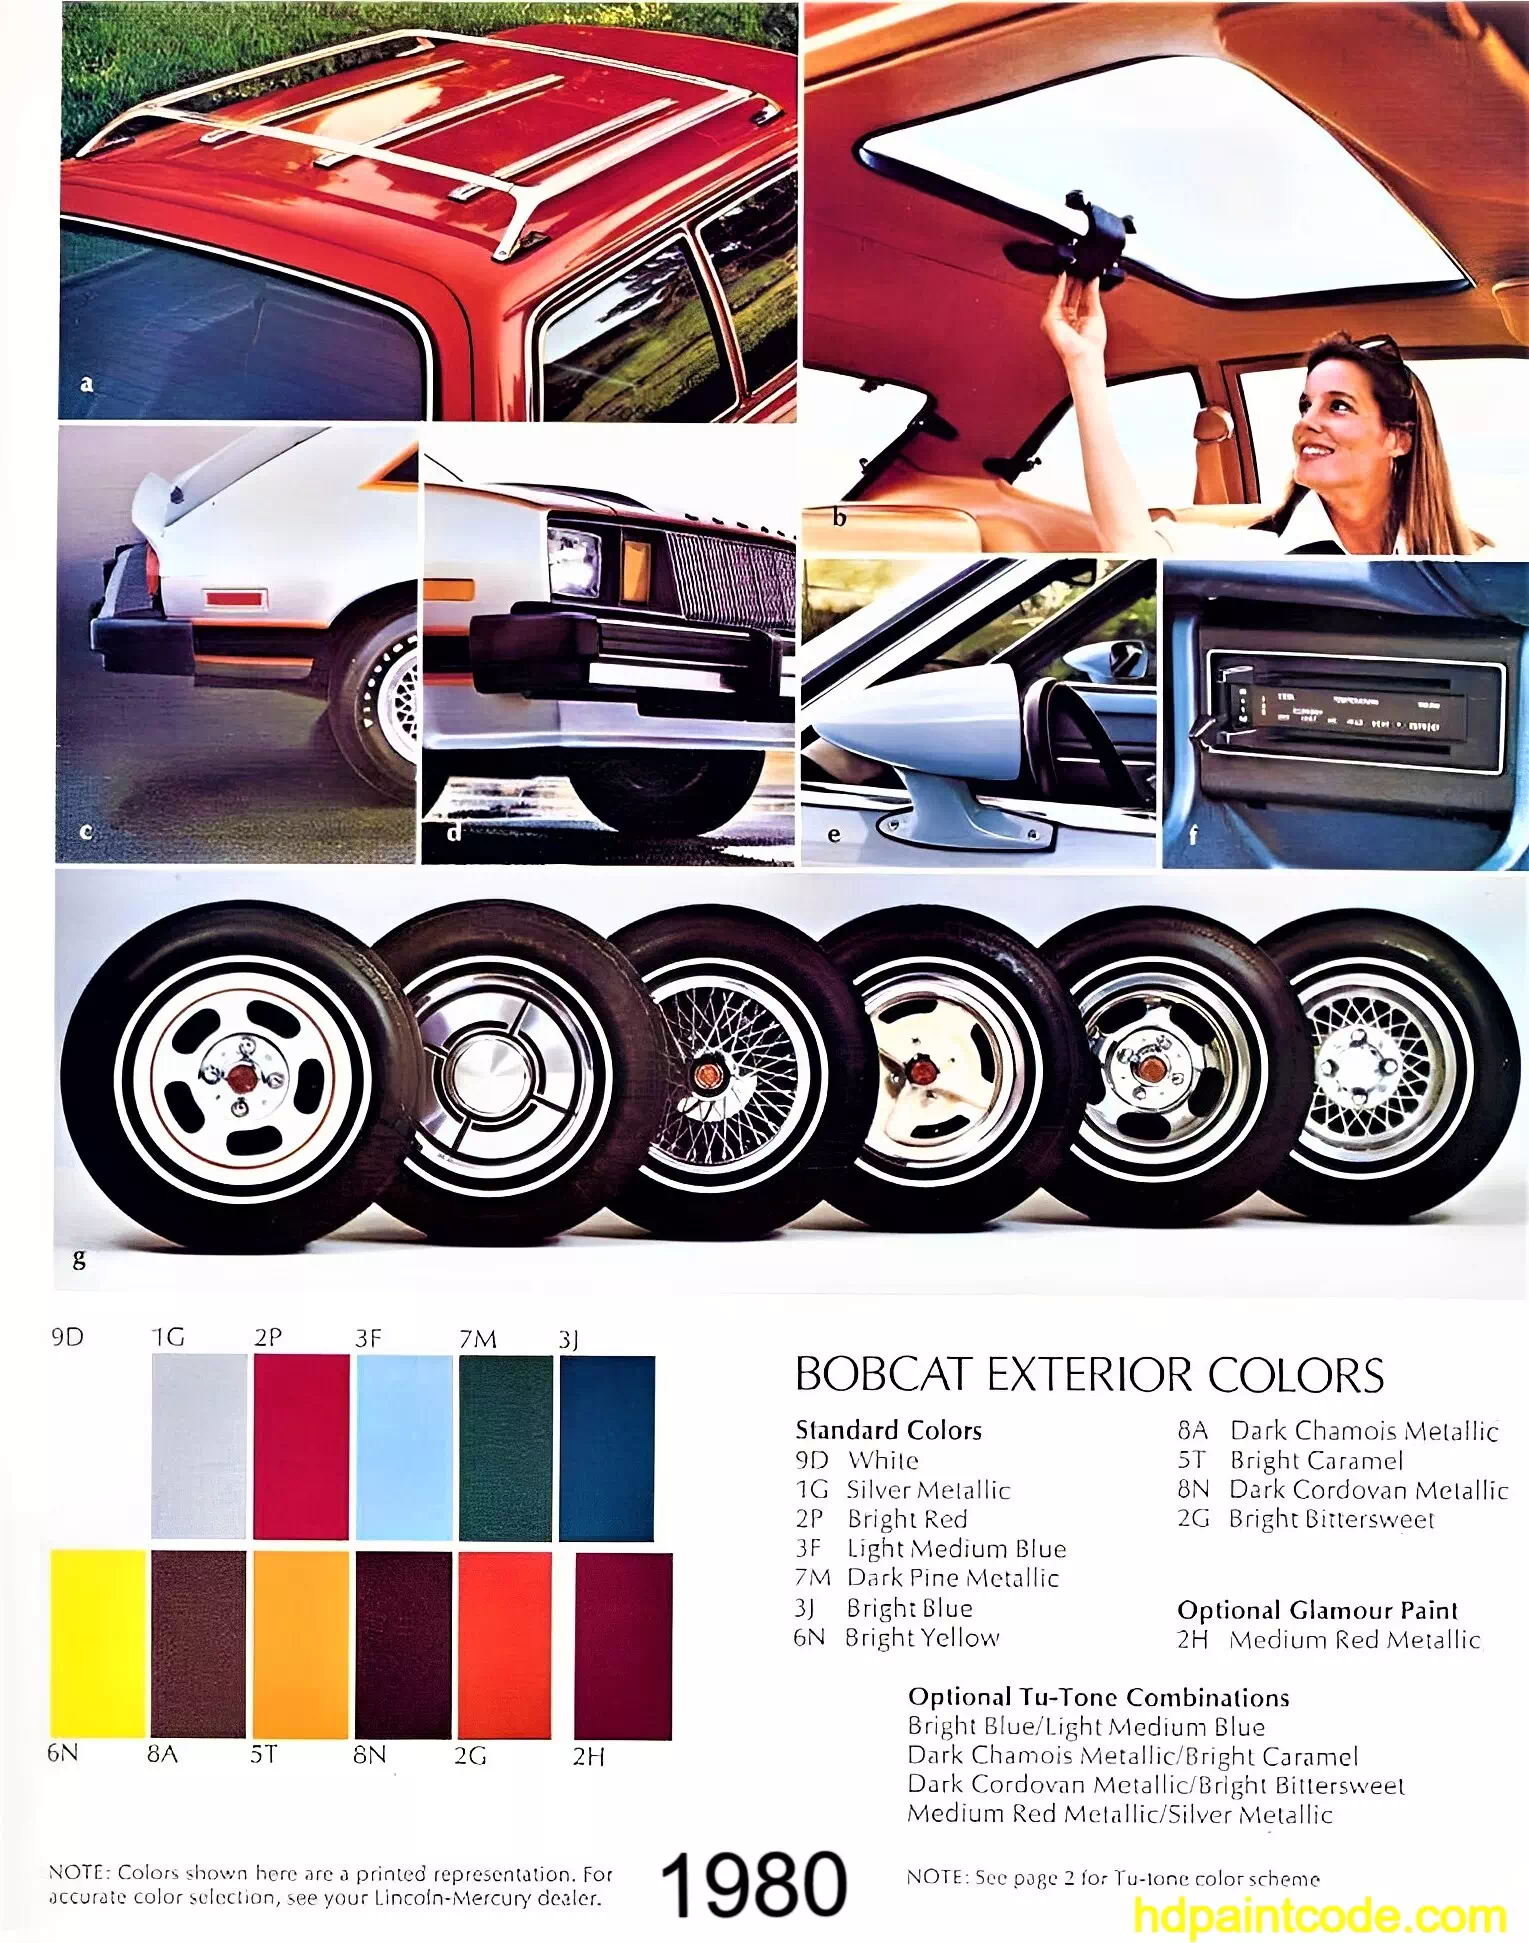 Paint codes, Exterior Colors, and Vehicle Rims used on the 1980 Mercury Bobcat automobiles